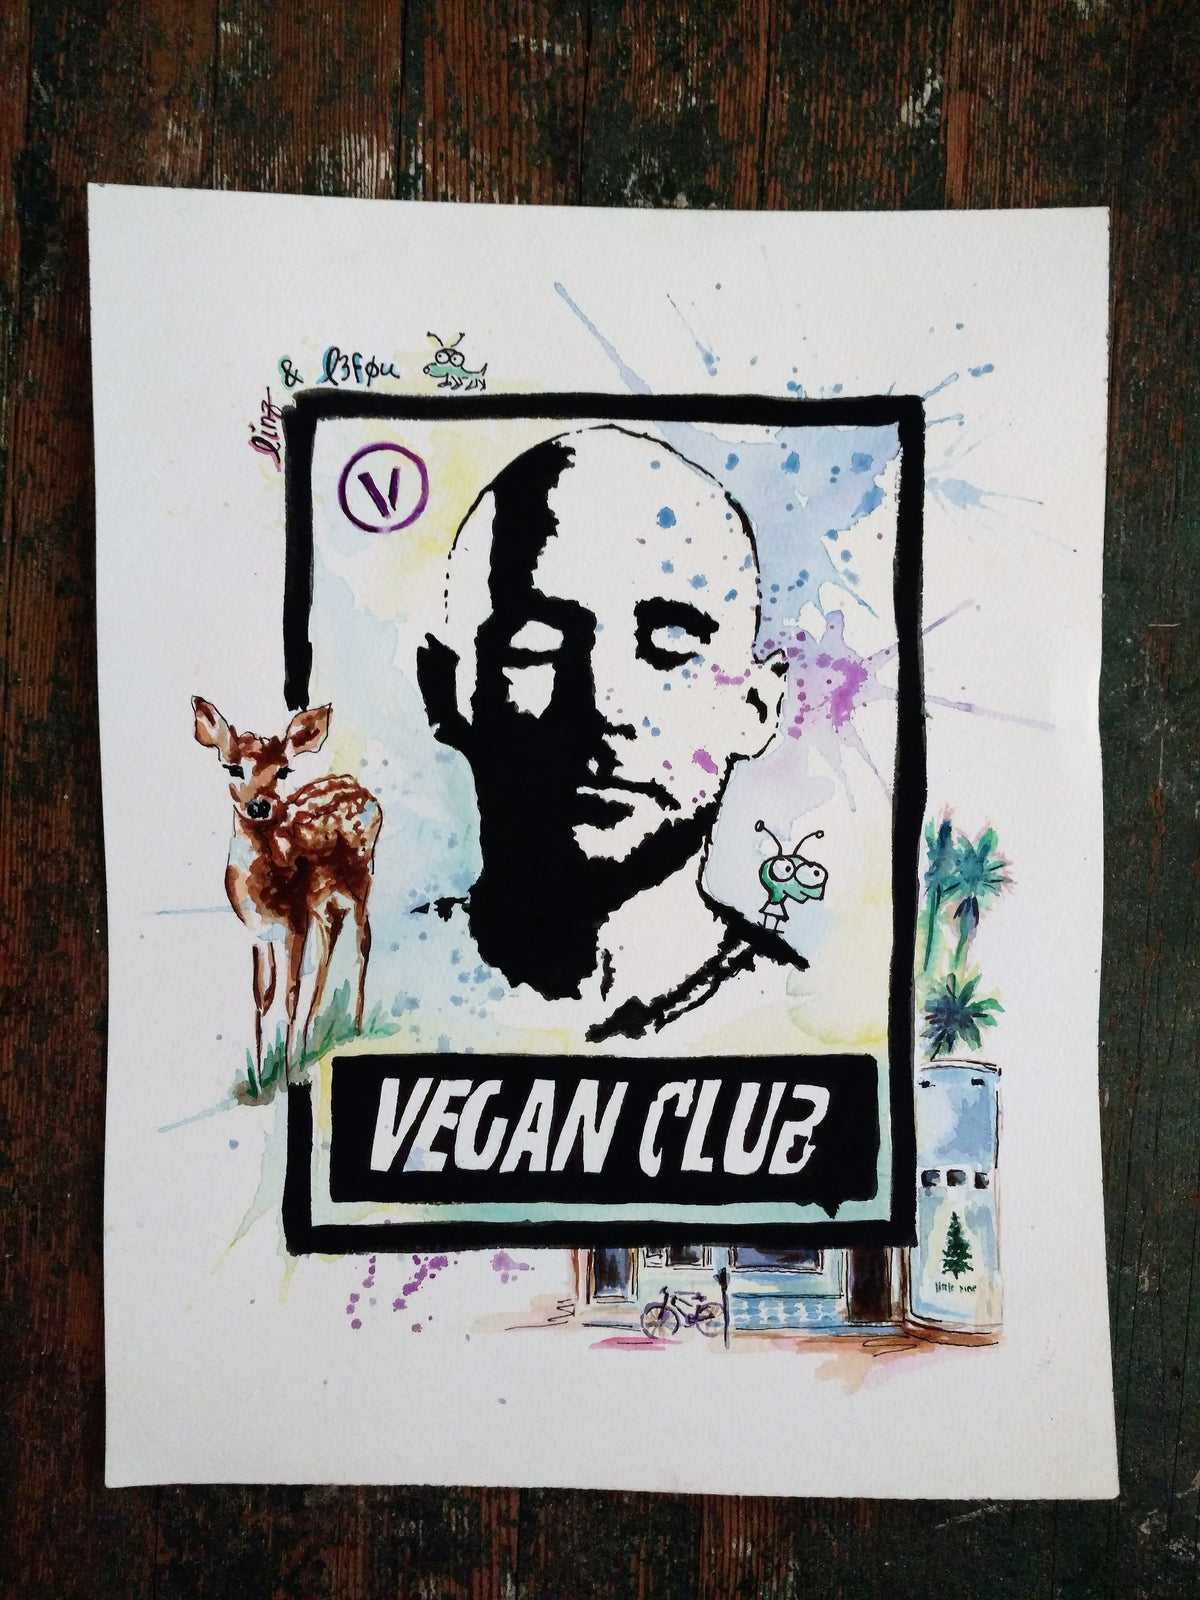 DONATED LITTLE PINE - 12x15 One of Kind Original Collab Artwork "Vegan Club" featuring Moby Signed @lindsayleigh1111 & "L3f0u" - Acrylic on paper